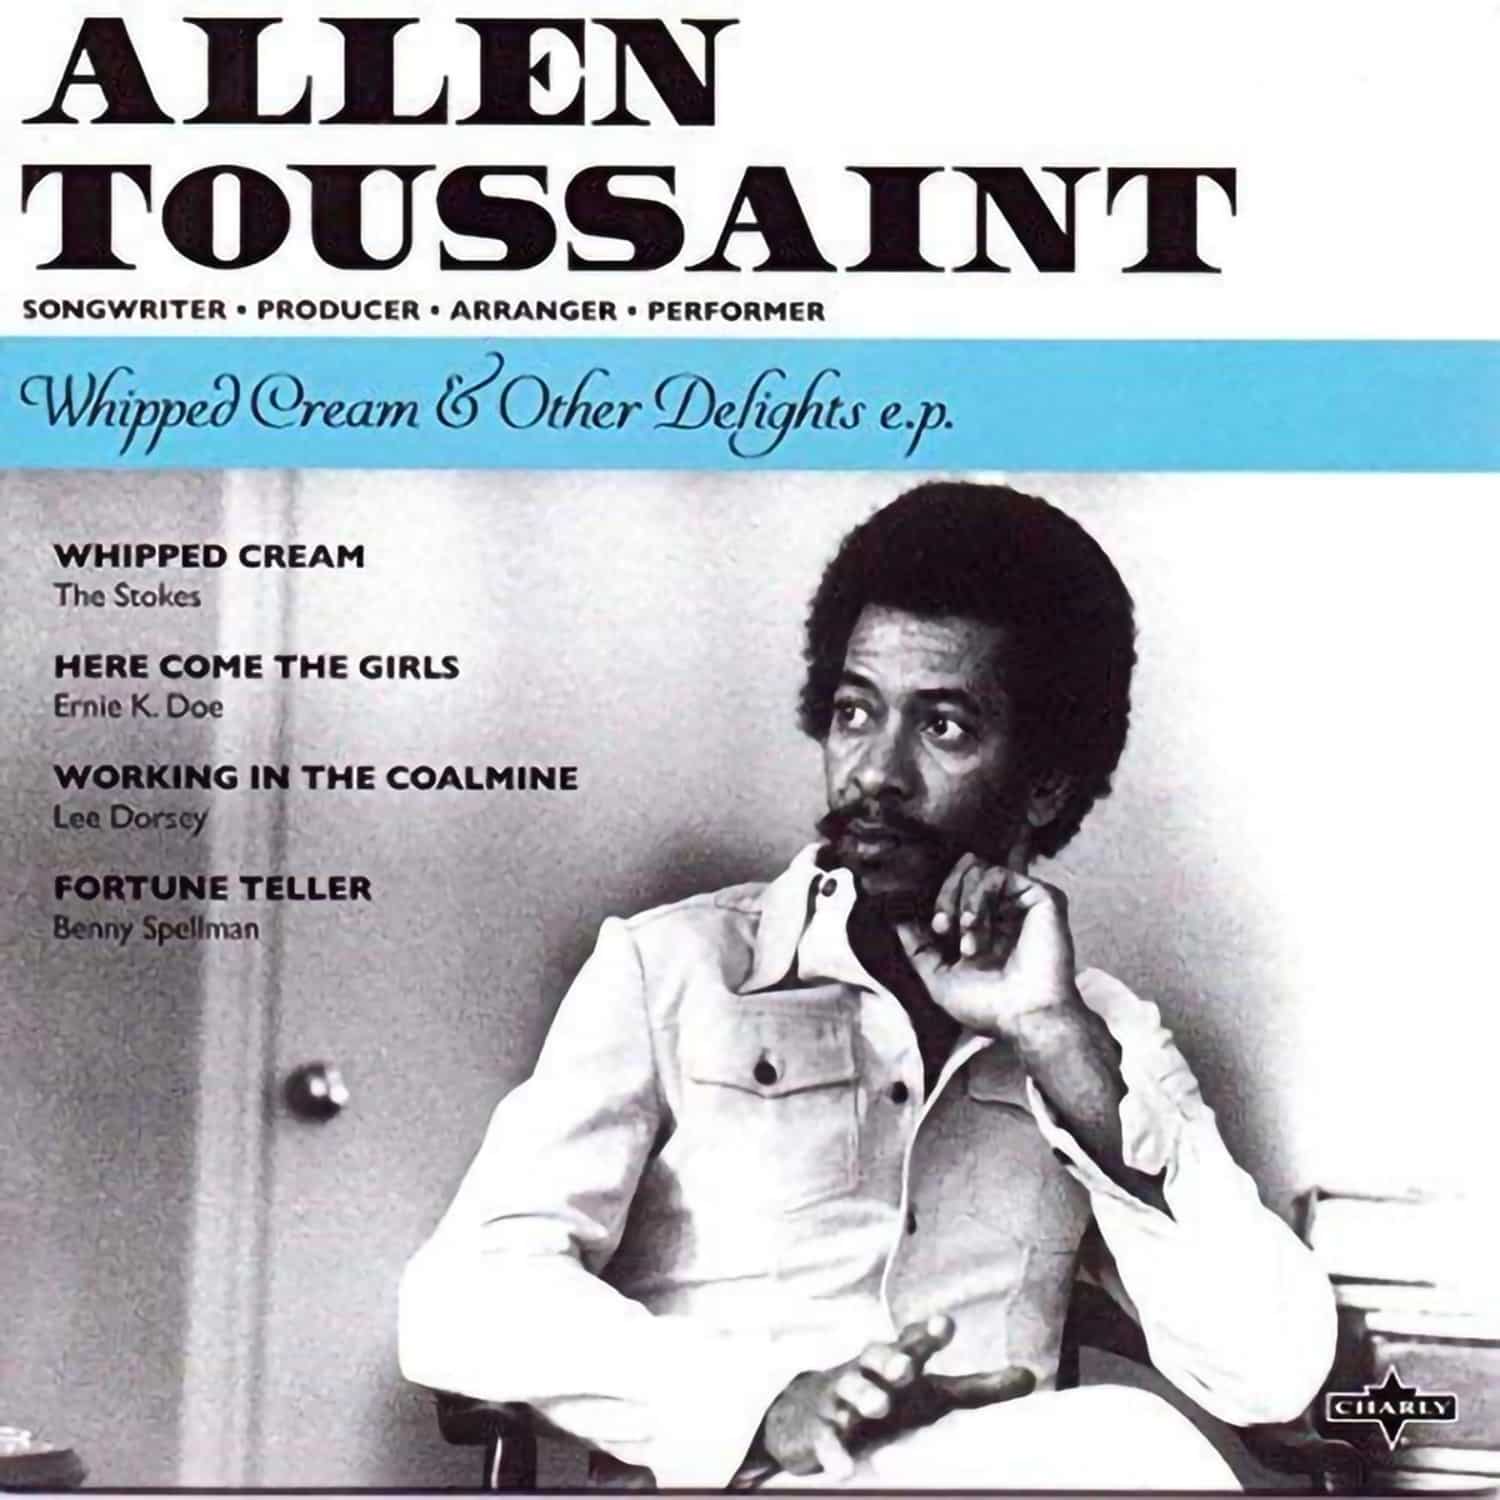 Allen Toussaint - 7-WHIPPED CREAM & OTHER DELIGHTS 